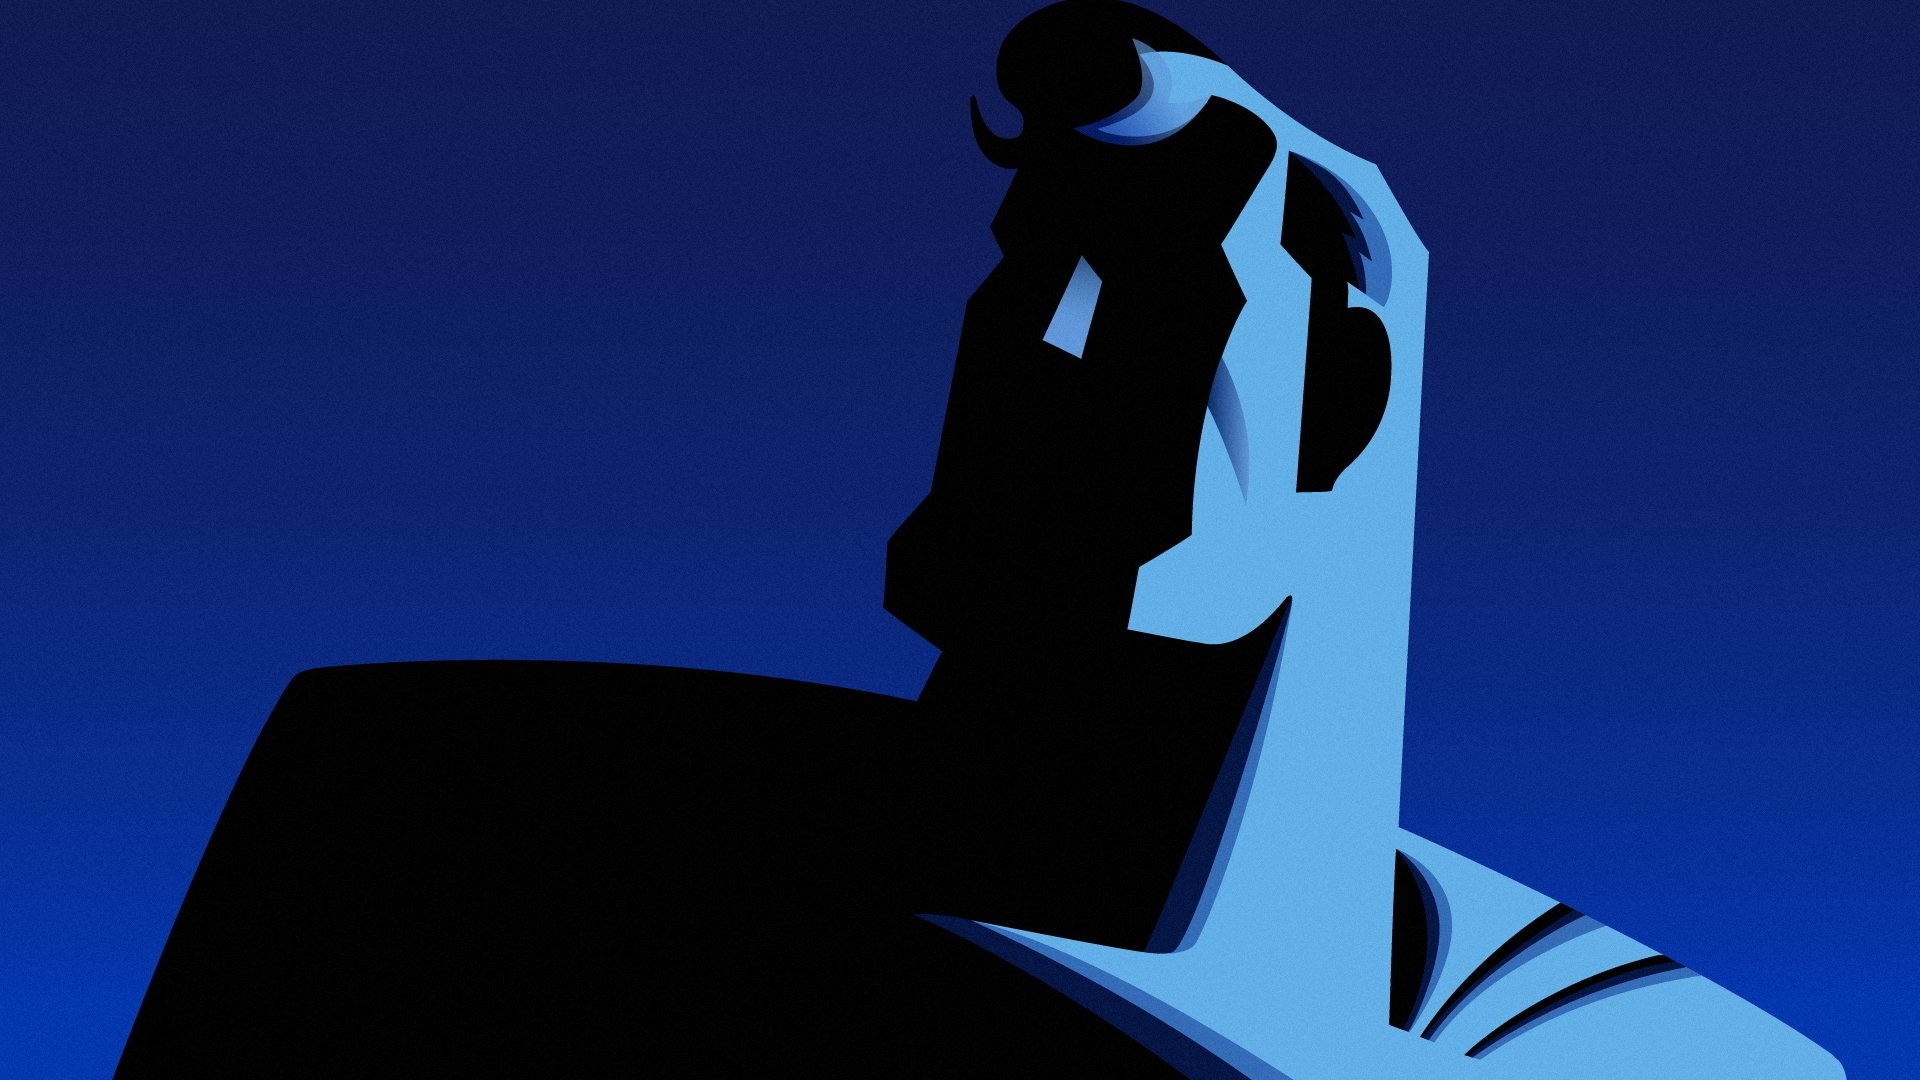 10+ Superman: The Animated Series HD Wallpapers and Backgrounds